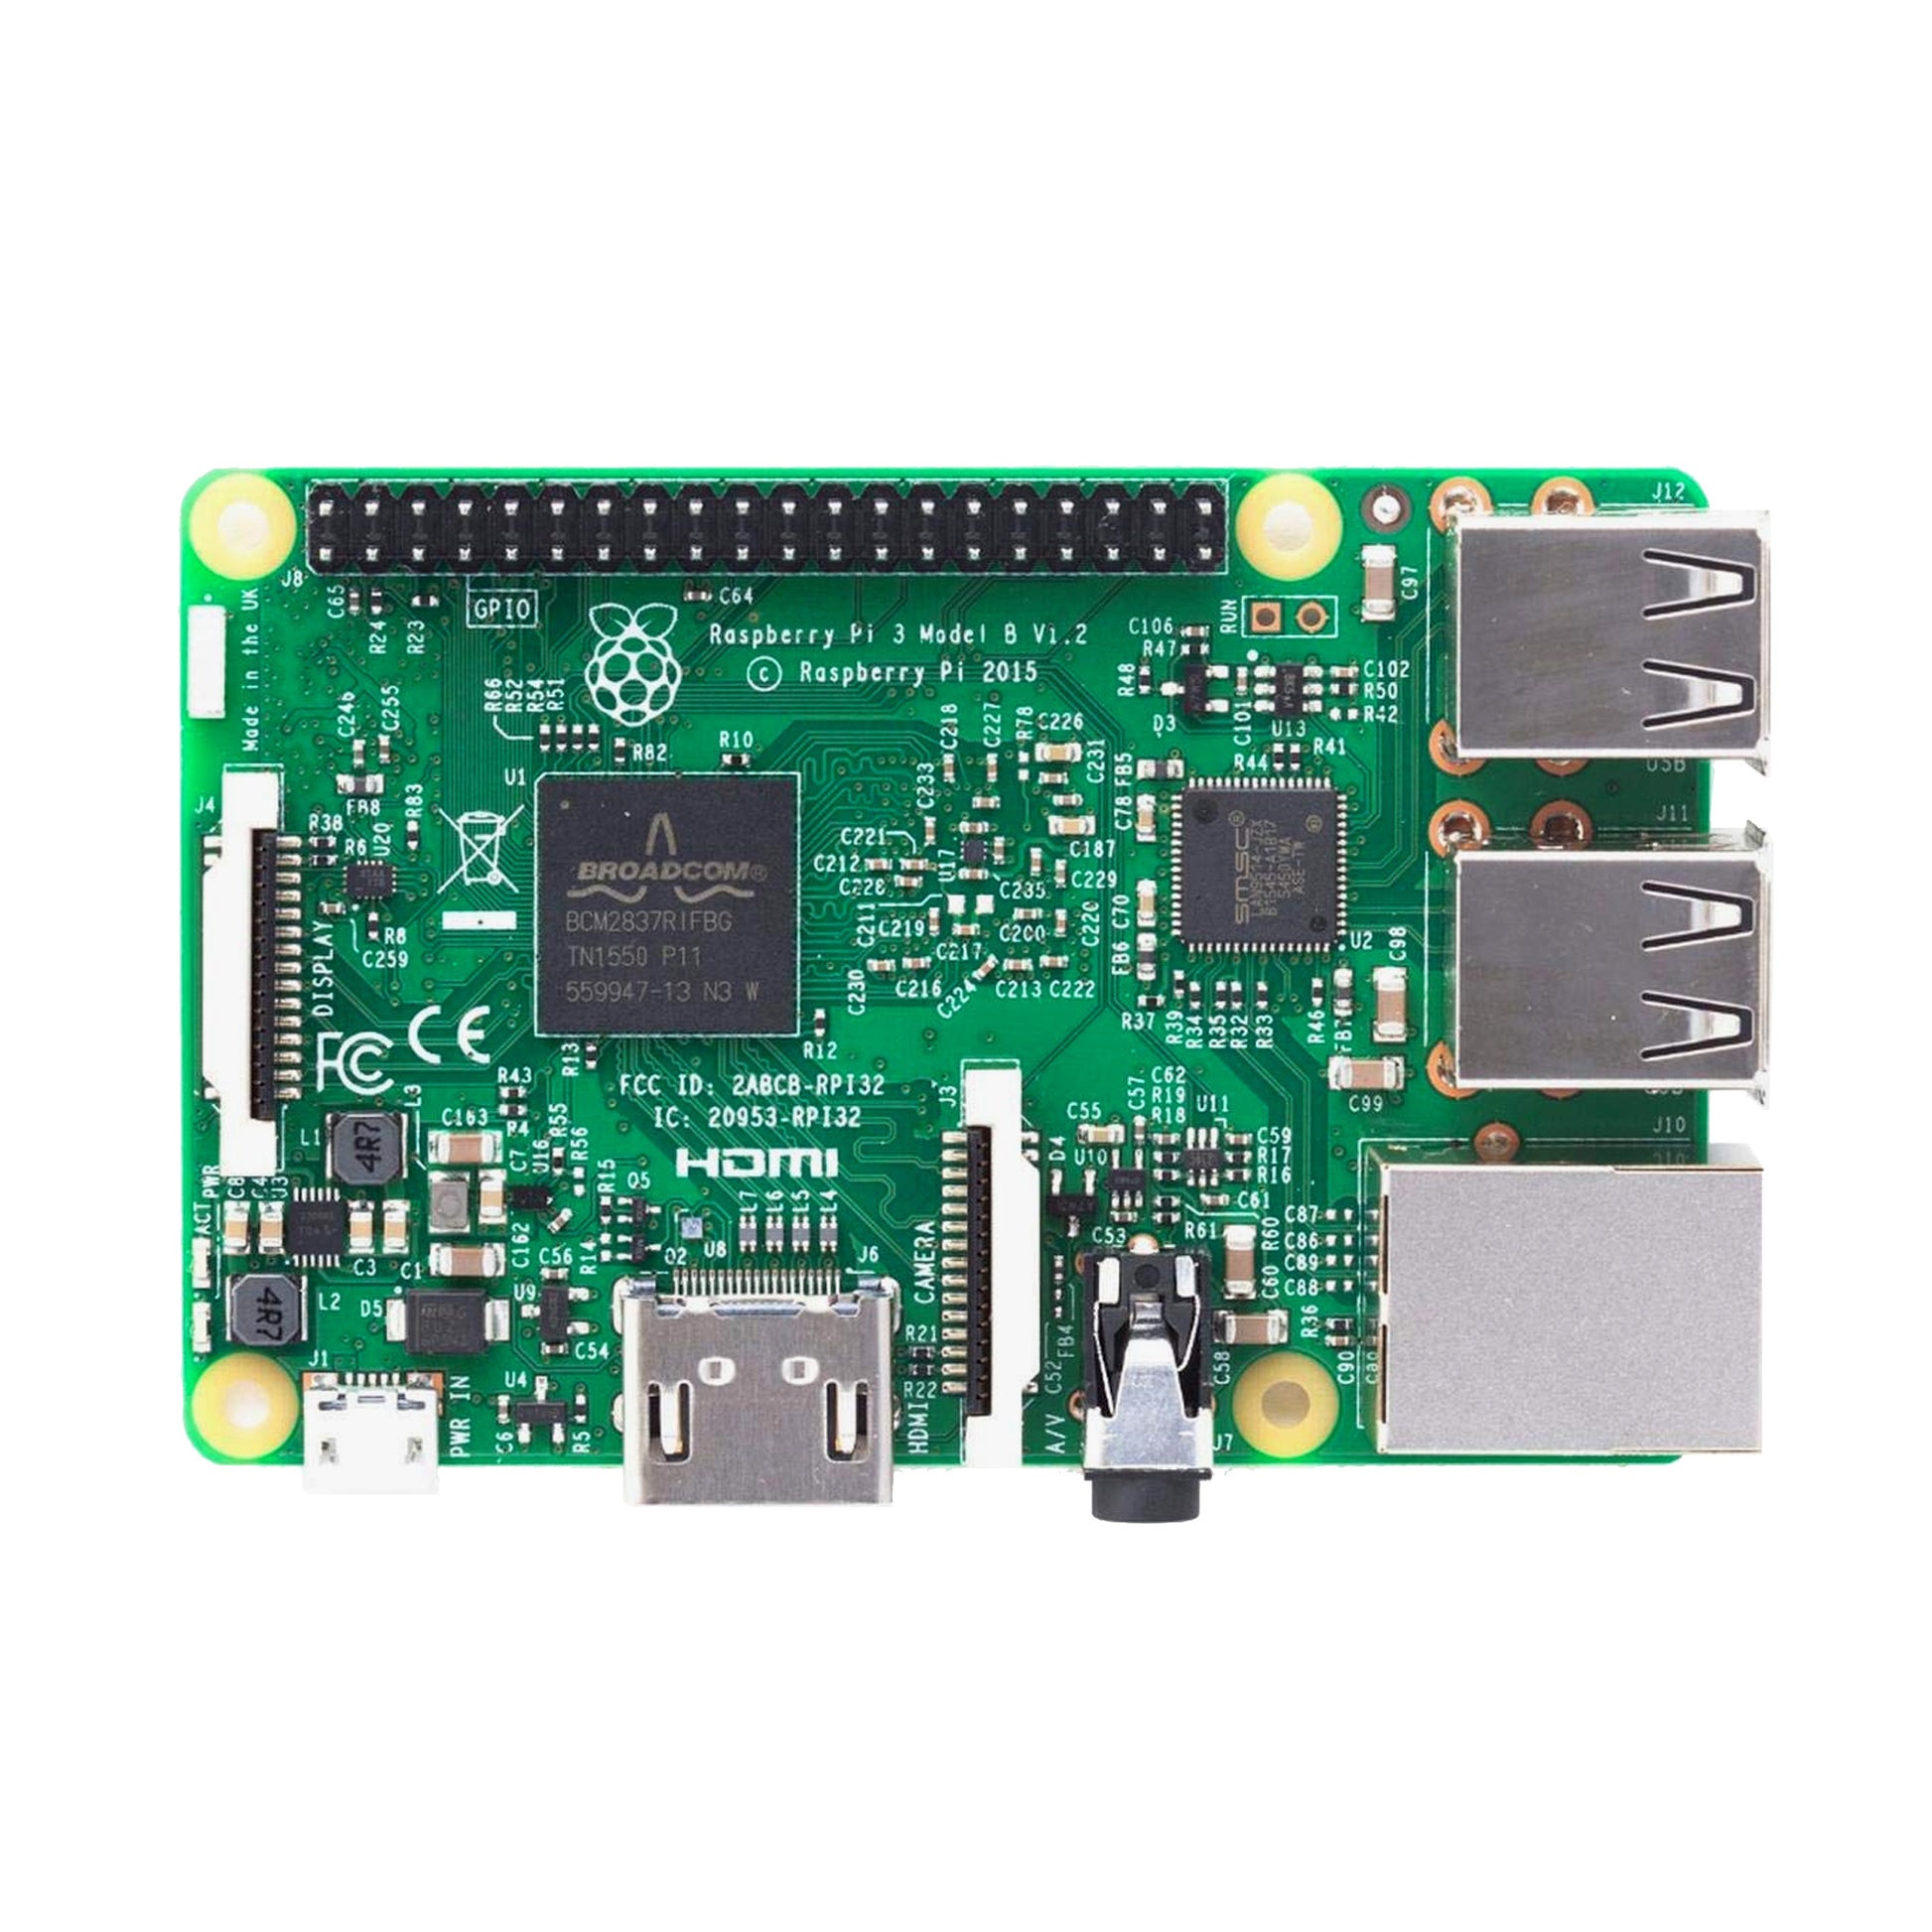 Raspberry Pi 3 Model B Motherboard with Broadcom BCM2387 chipset and 1.2GHz and Quad-Core ARM Cortex-A53 - RP009 - REES52